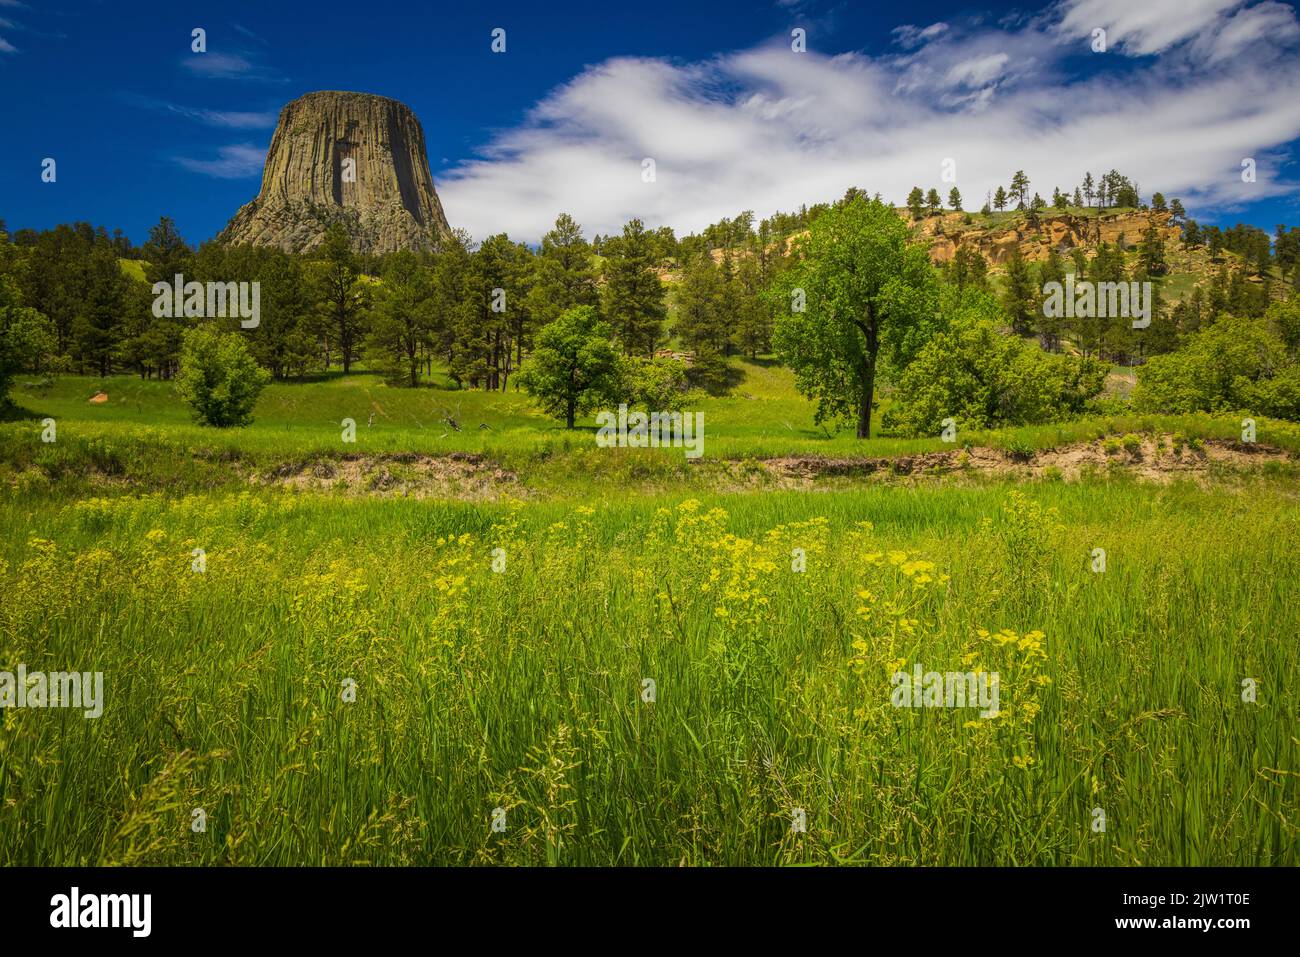 Devils Tower in Wyoming was the first United States national monument, established on September 24, 1906 by President Theodore Roosevelt. Stock Photo